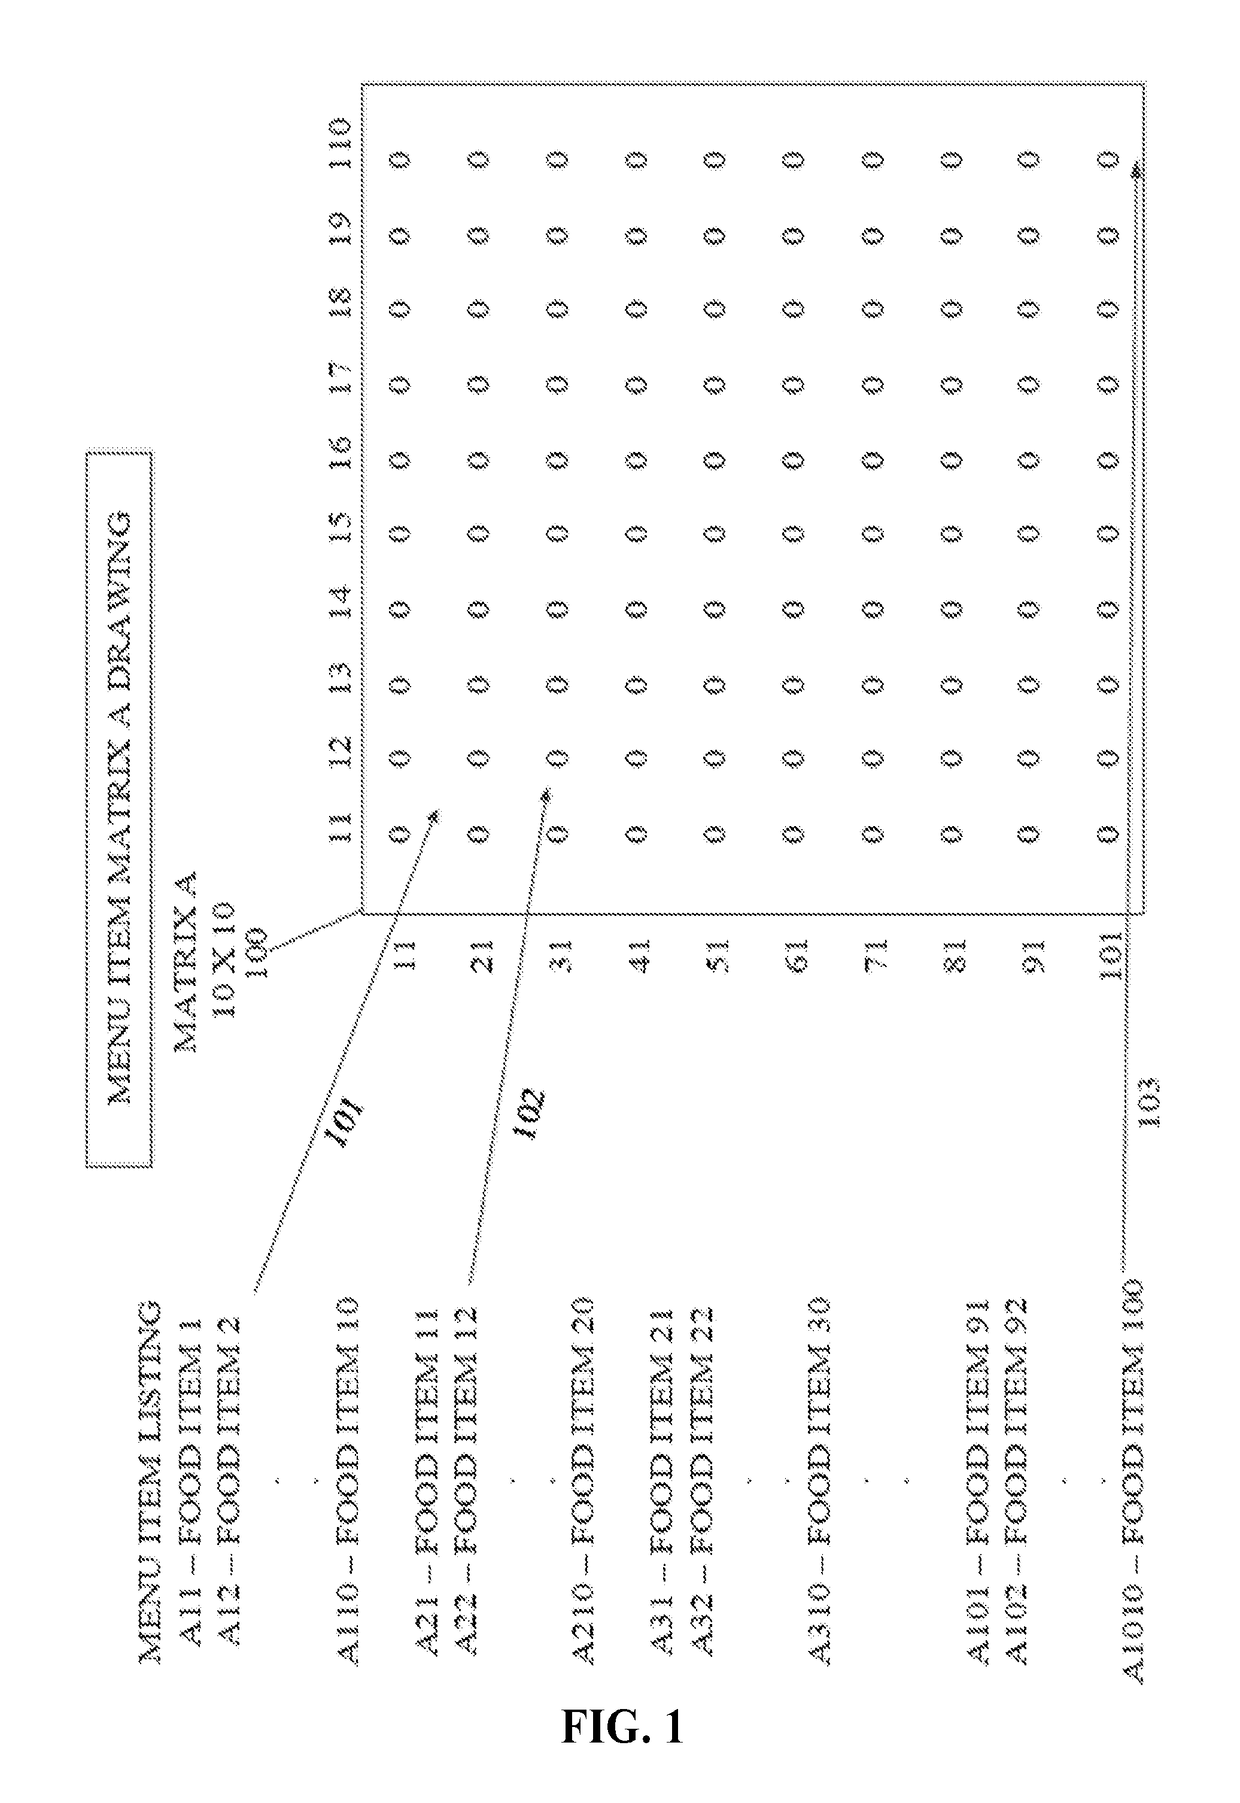 Systems and methods for dynamic pricing of food items